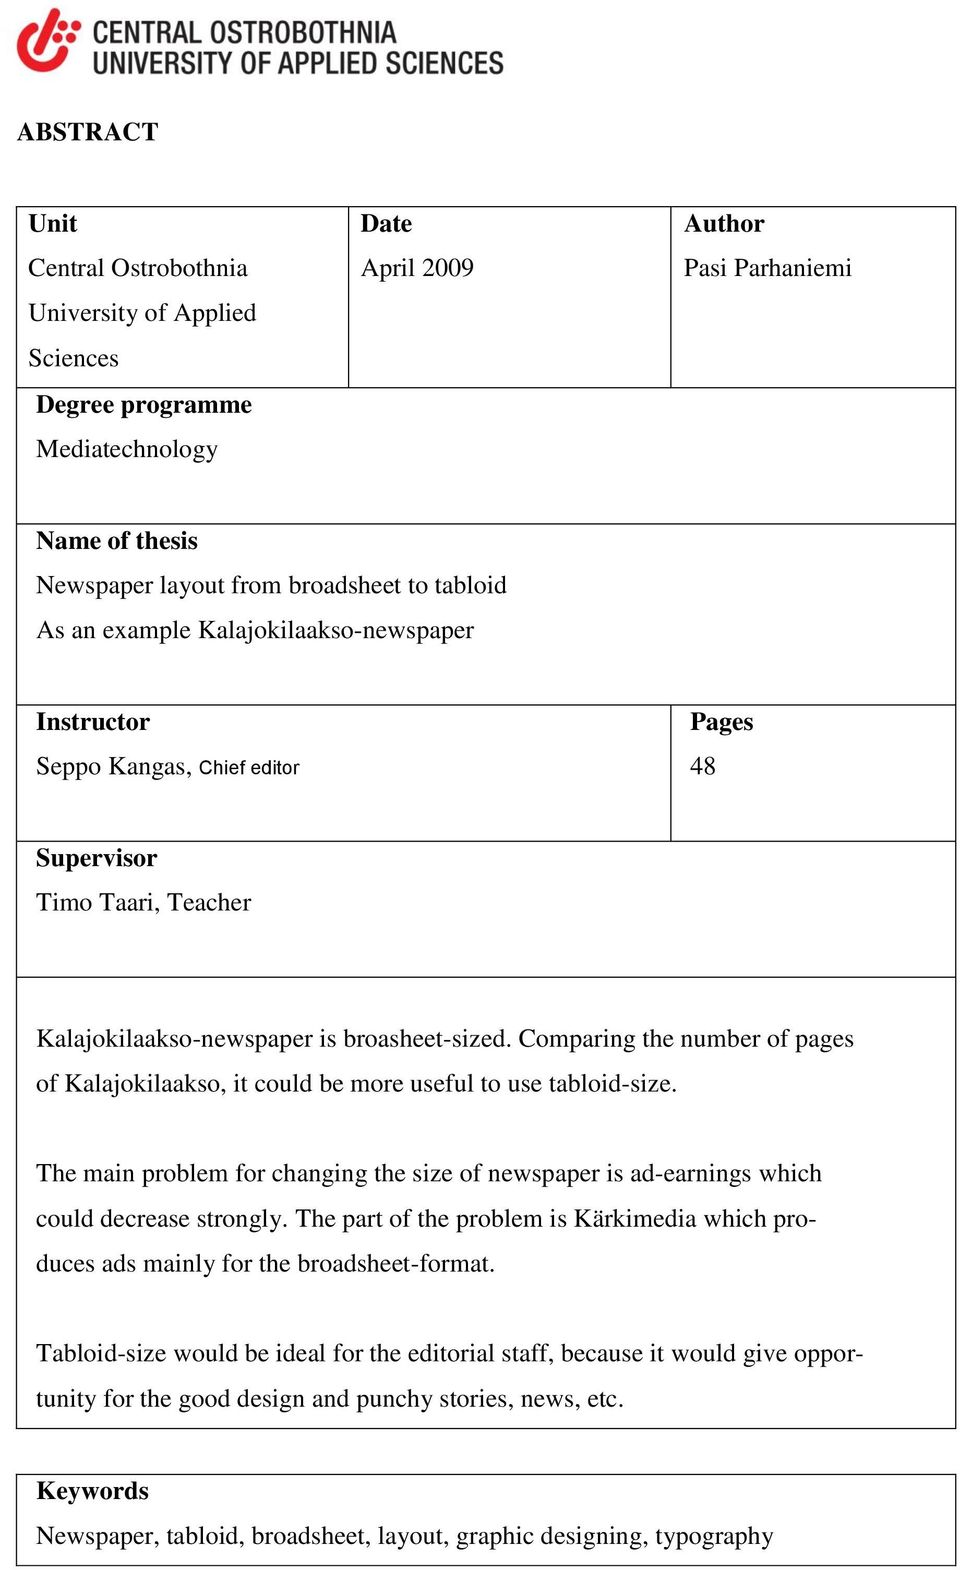 Comparing the number of pages of Kalajokilaakso, it could be more useful to use tabloid-size. The main problem for changing the size of newspaper is ad-earnings which could decrease strongly.